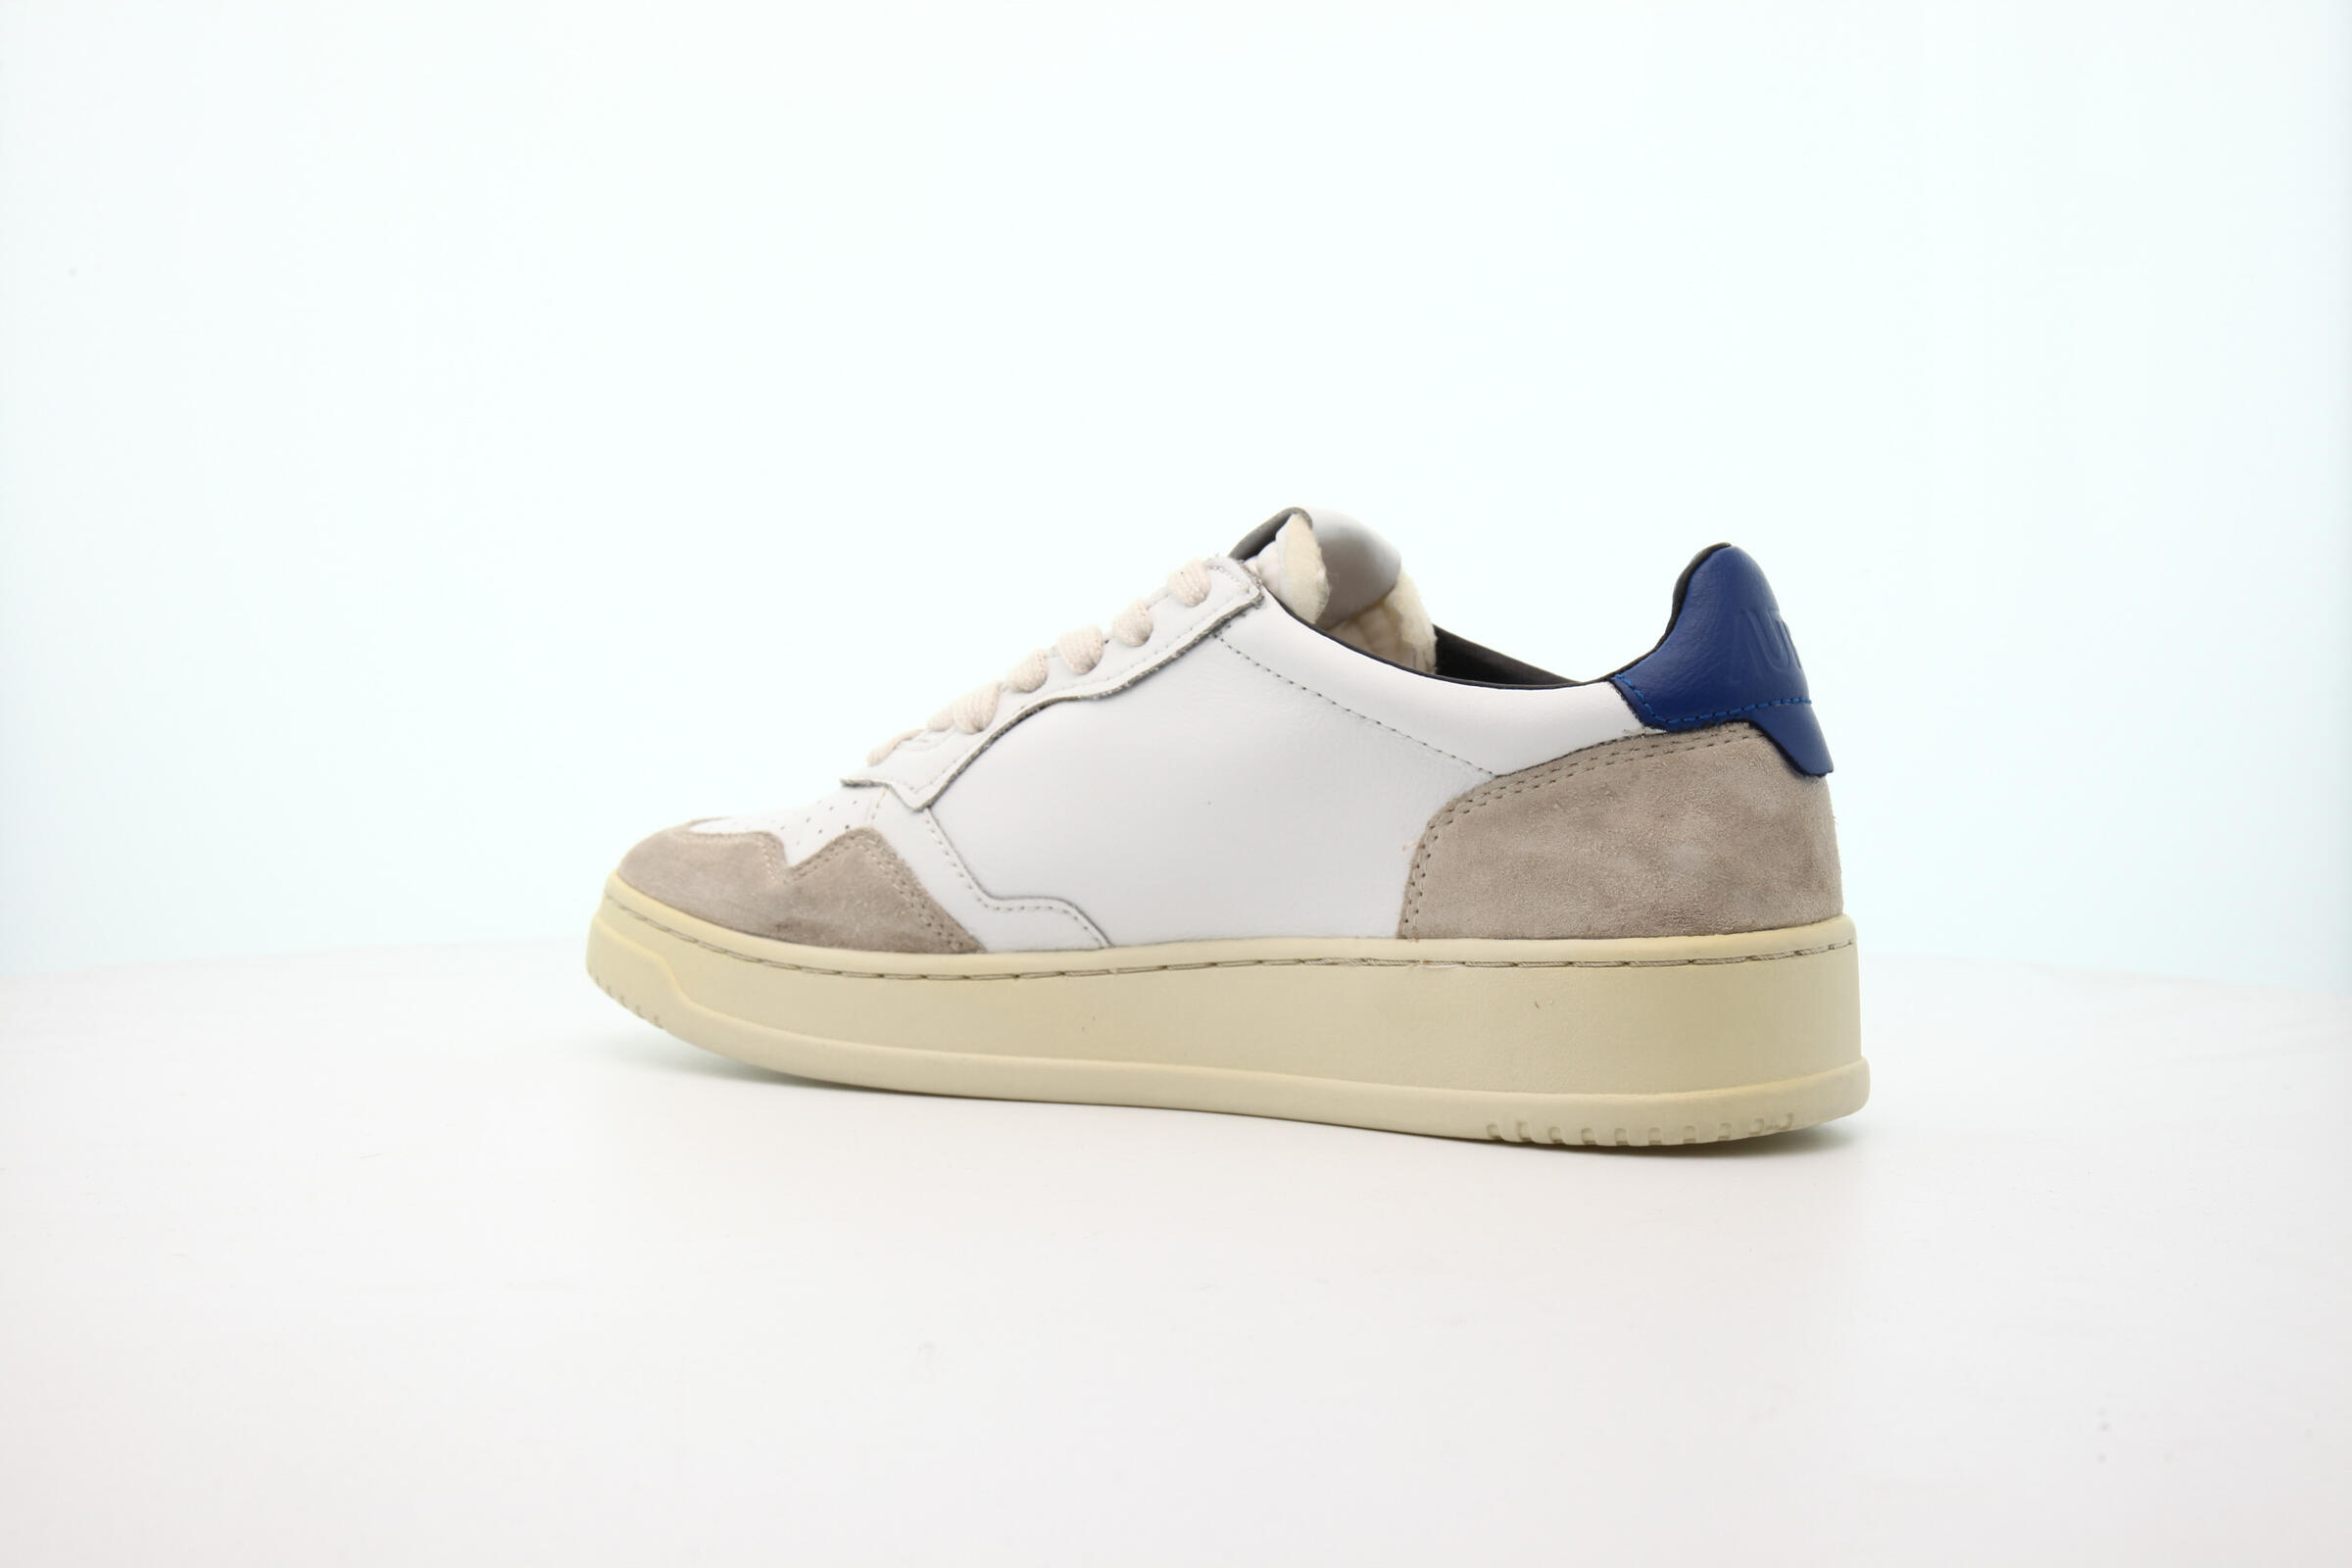 Autry Action Shoes MEDALIST LOW "BABY BLUE"